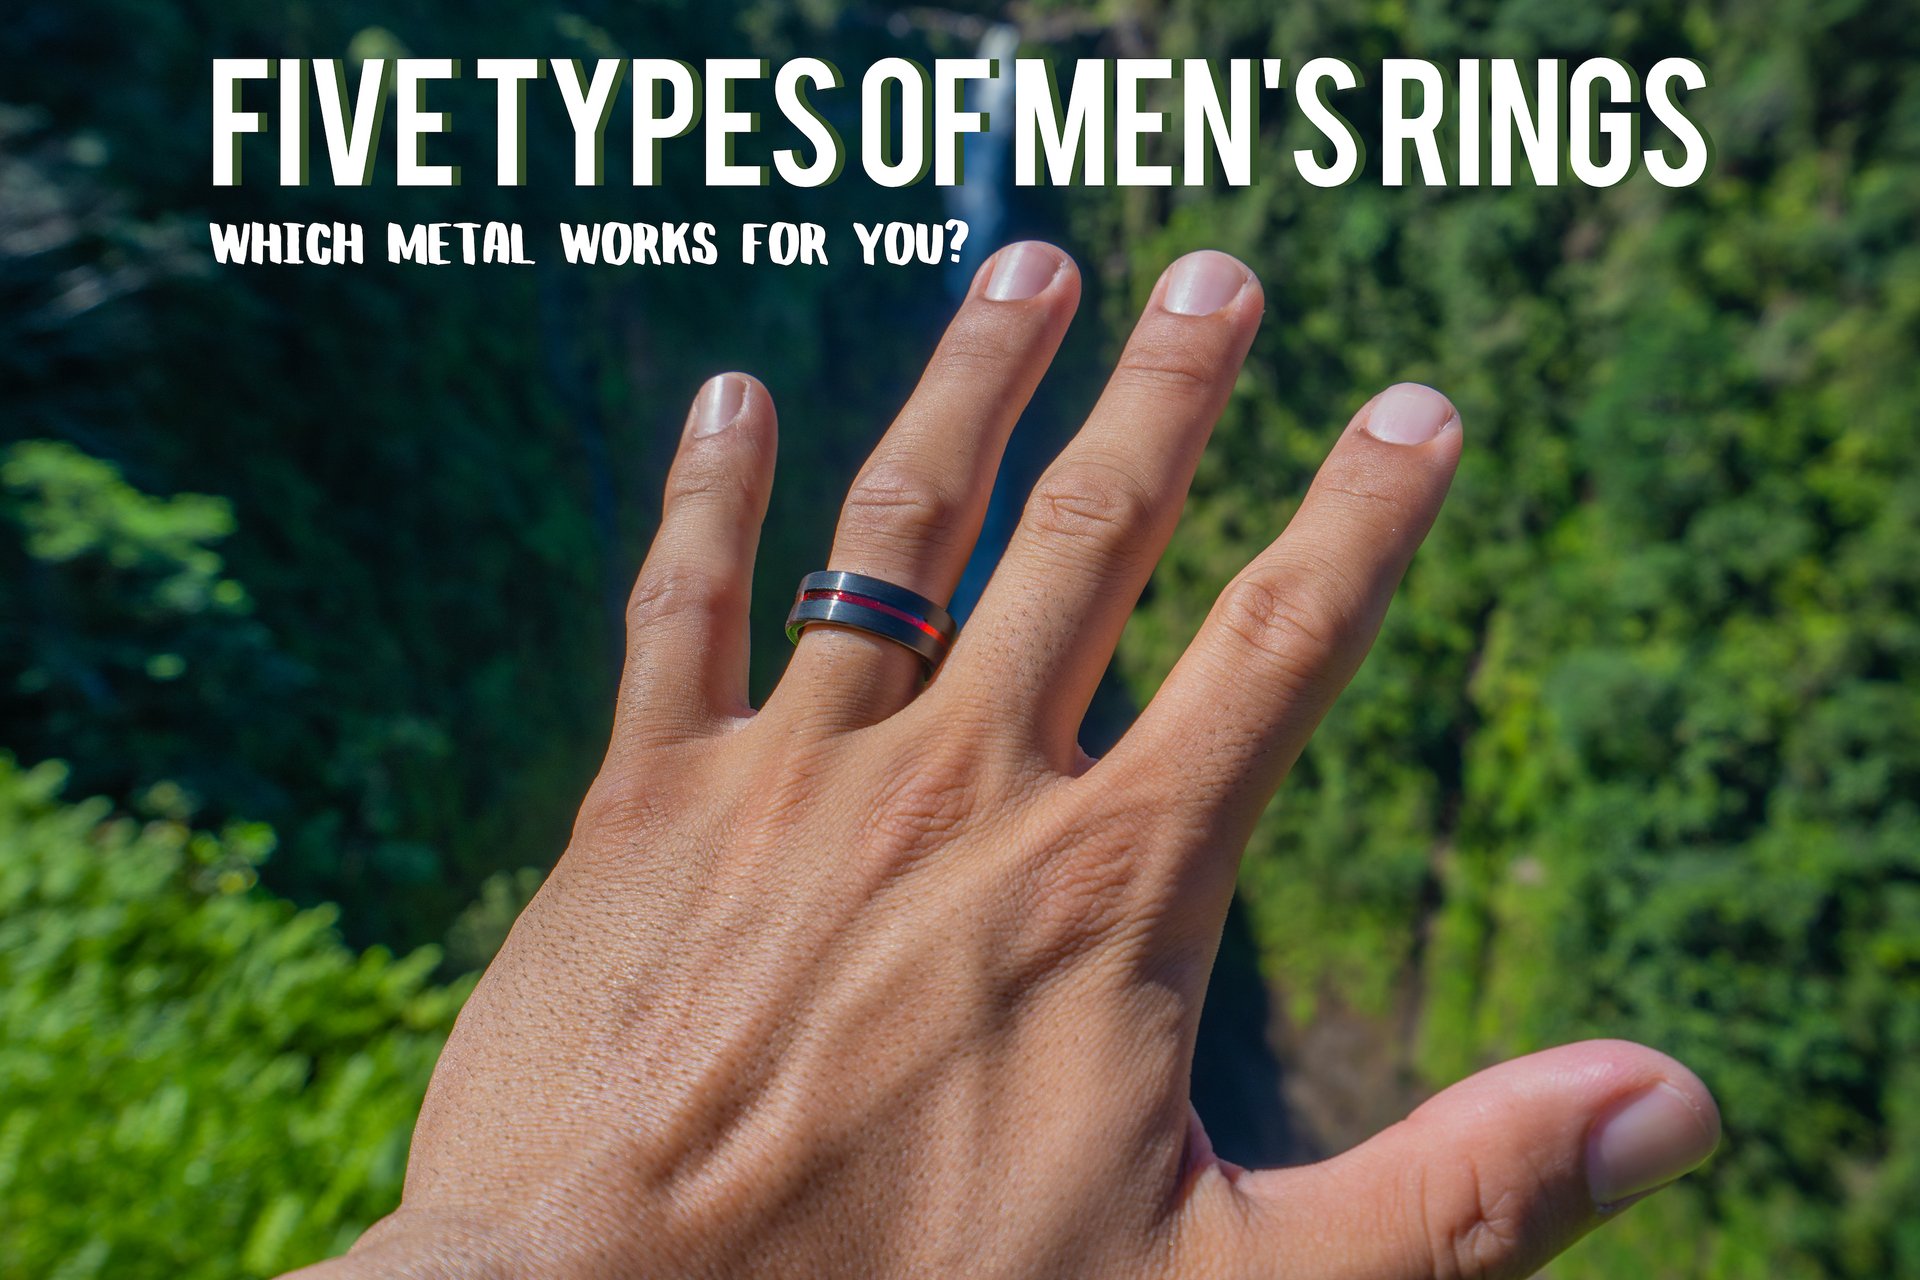 Five Types of Men's Rings. Which Metal Works for You?